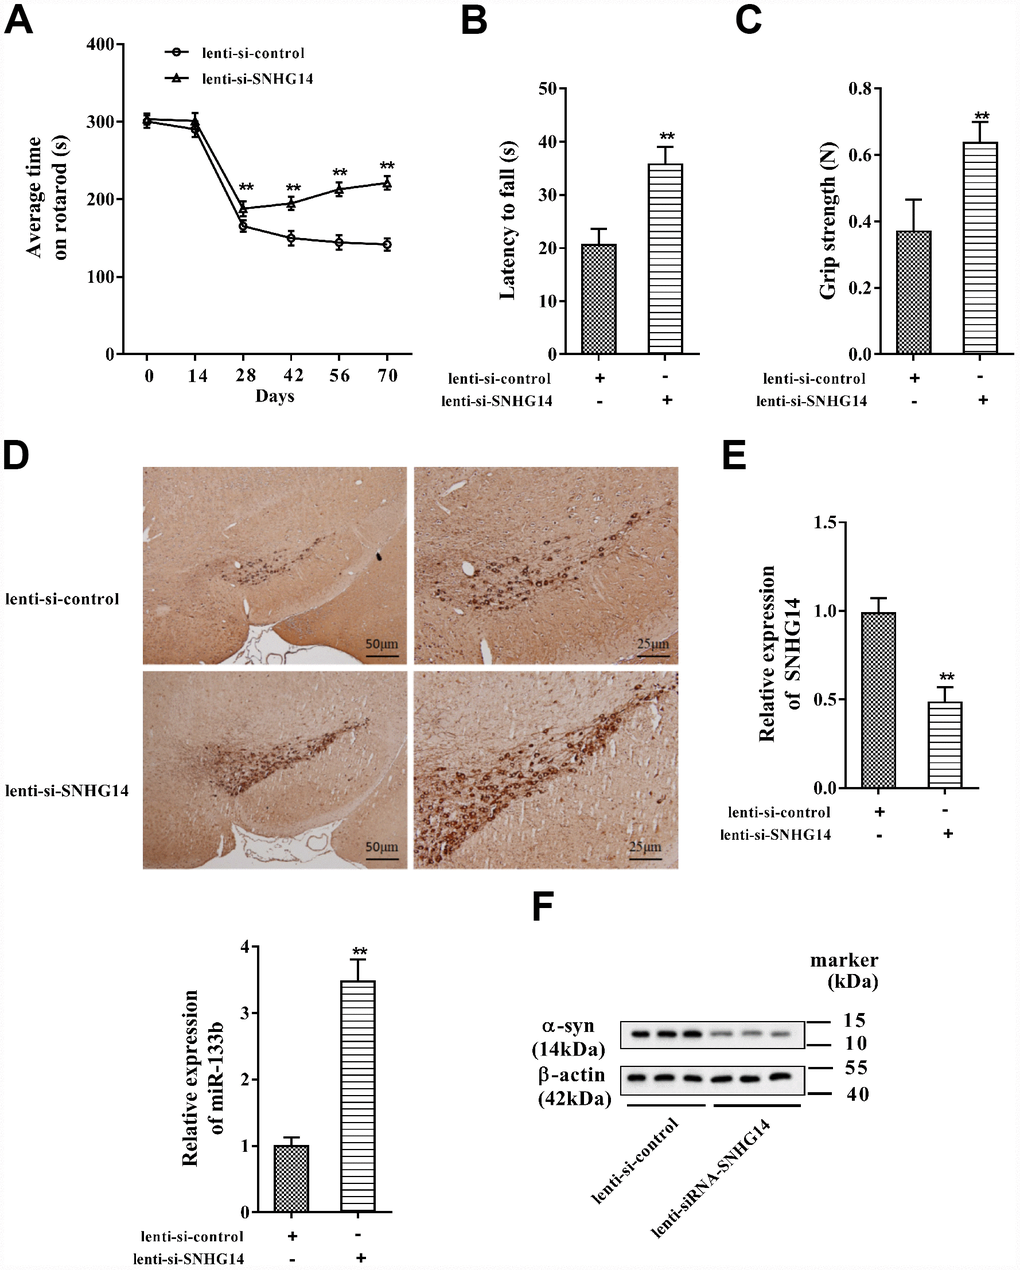 Down-regulated SNHG14 mitigated neuron injury in PD mice. PD mice (n=7) were injected with lenti-si-control or lenti-si-SNHG14. The motor function of mice was assessed with (A) rotarod performance, (B) reversed screen test, and (C) forelimb grip strength test. (D) Immunohistochemistry staining was performed to determine the number of TH-positive DA neuron in the brain tissues of mice. (E) Relative expression of SNHG14 and miR-133b in brain tissues of mice was evaluated with qRT-PCR. (F) Level of α-syn and SP-1 protein in brain tissues of mice was assessed by western blotting. **P